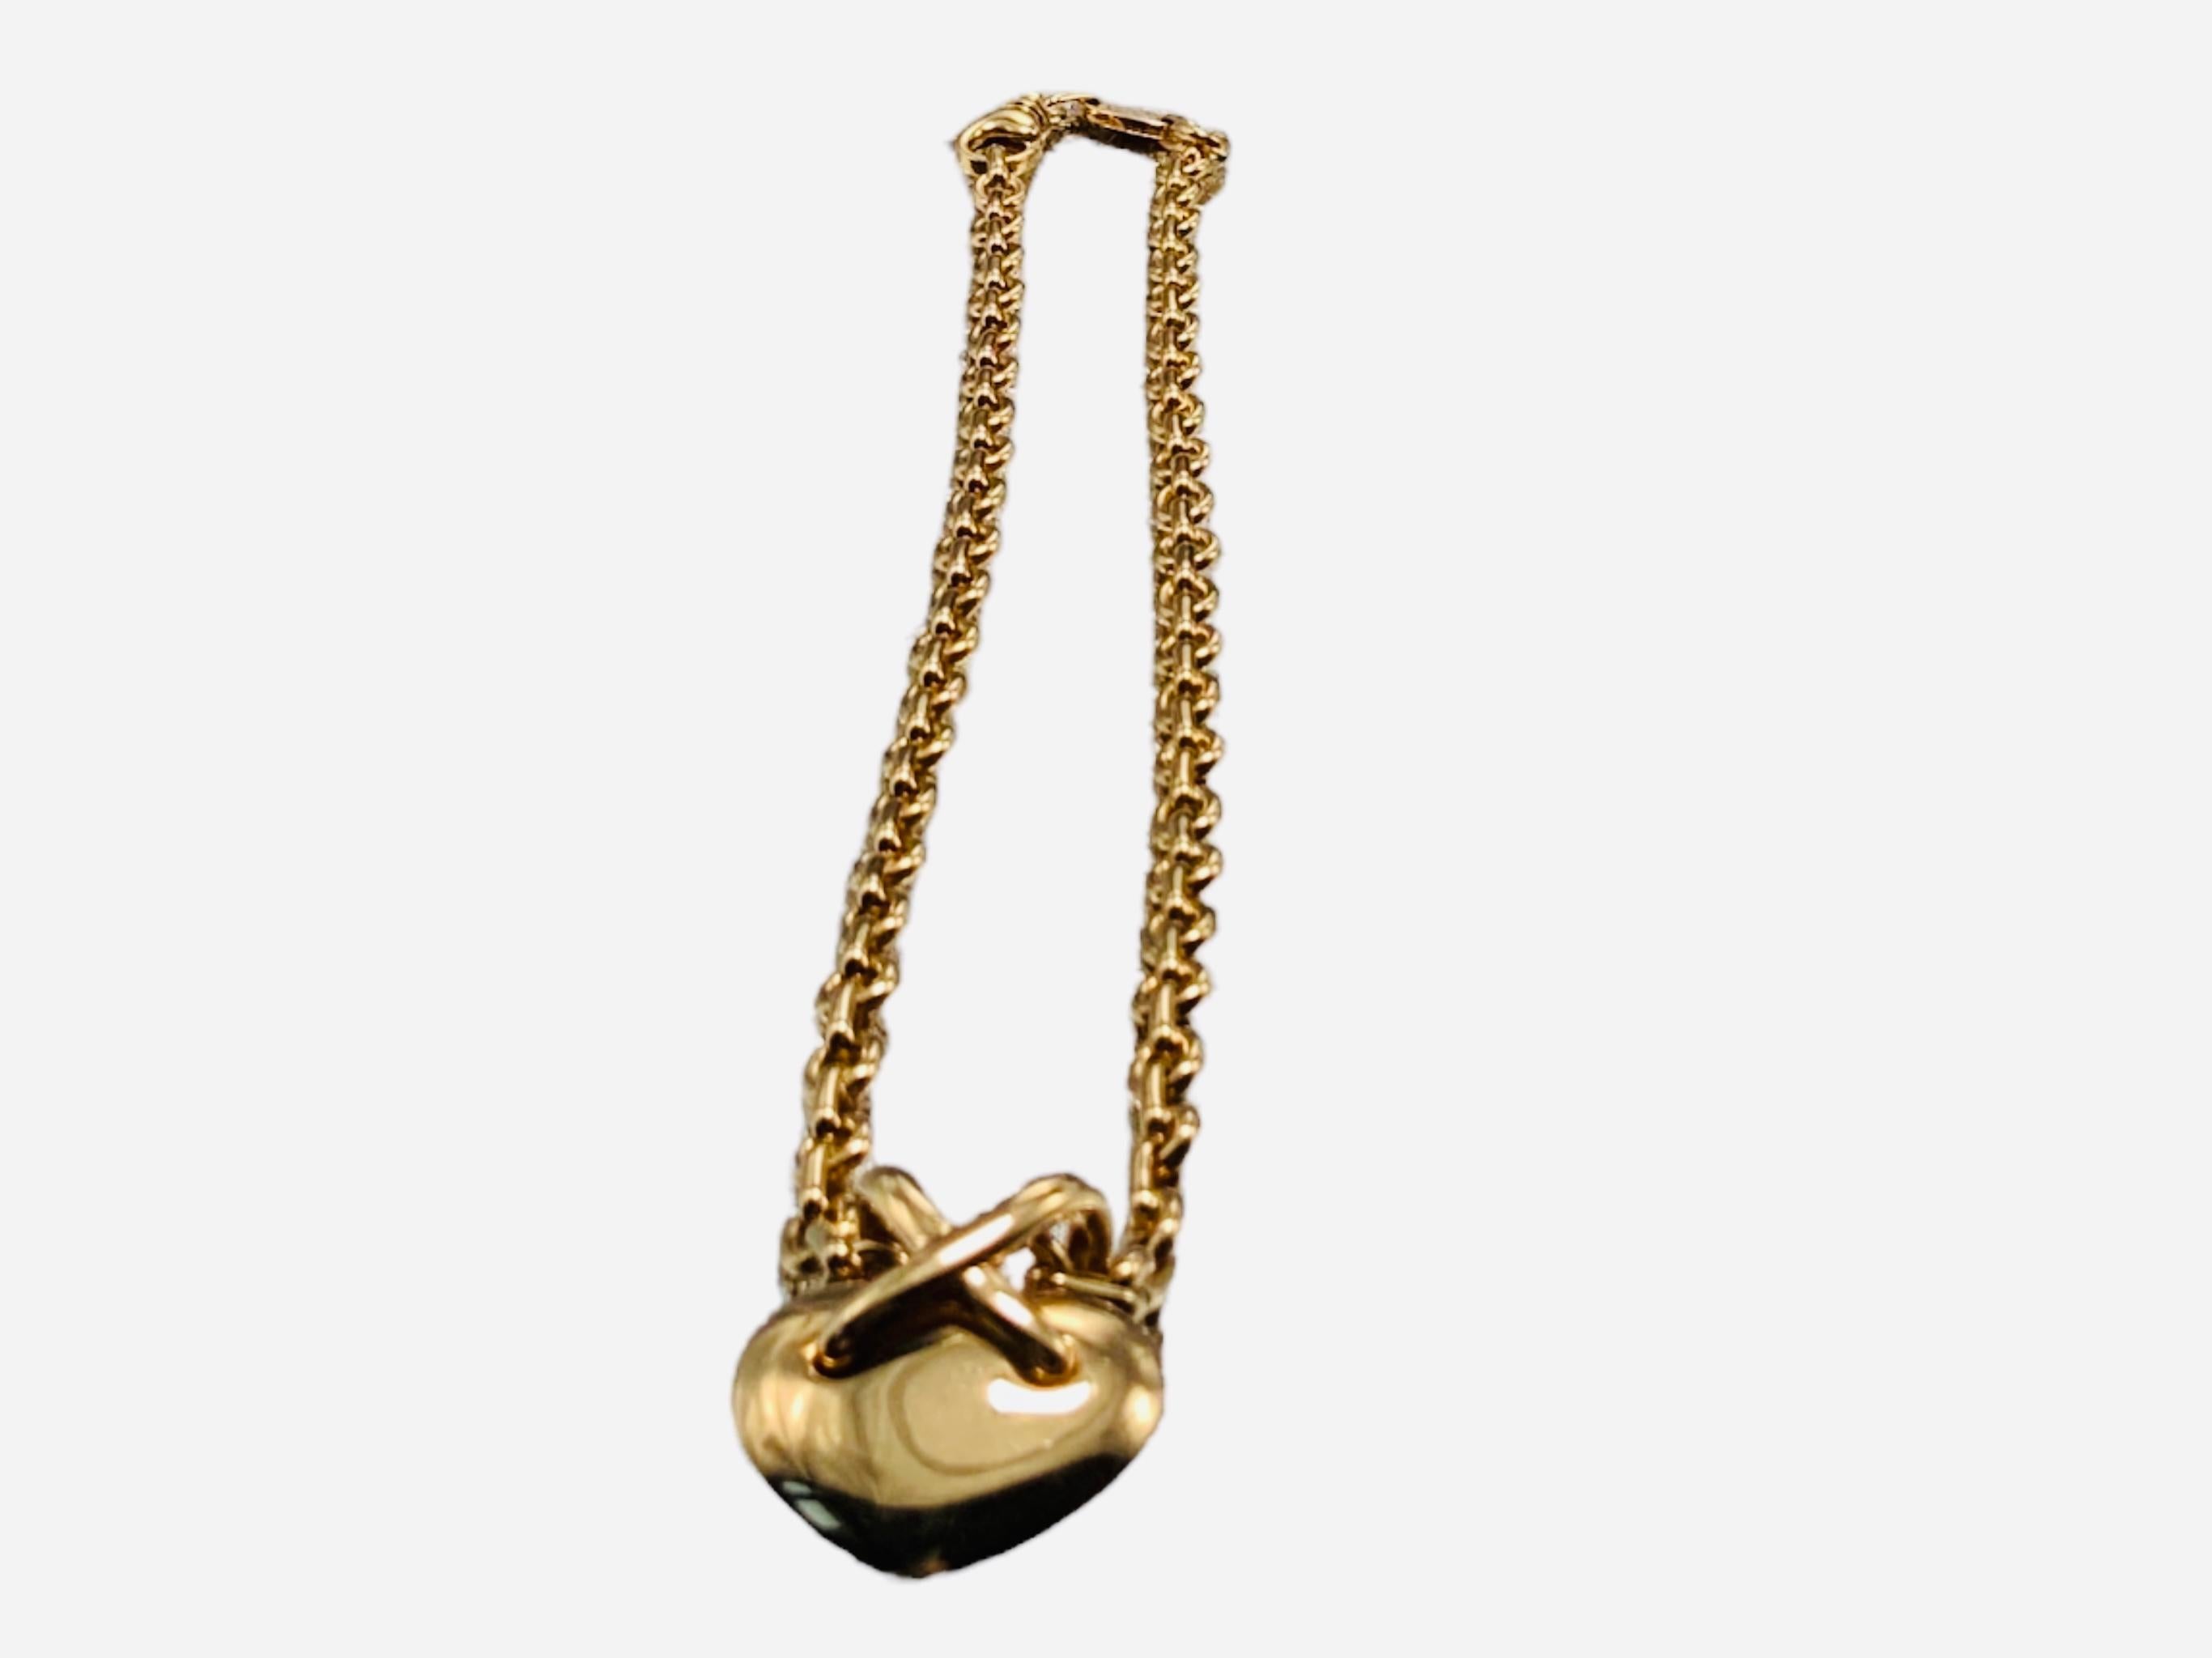 This a 750 (18K gold) Chaumet, Paris Liens Heart necklace. It depicts a gold cable link necklace with heart pendant  that has a large “X” link in the top center. The necklace has a lobster claw clasp closure. Both the necklace and the pendant are